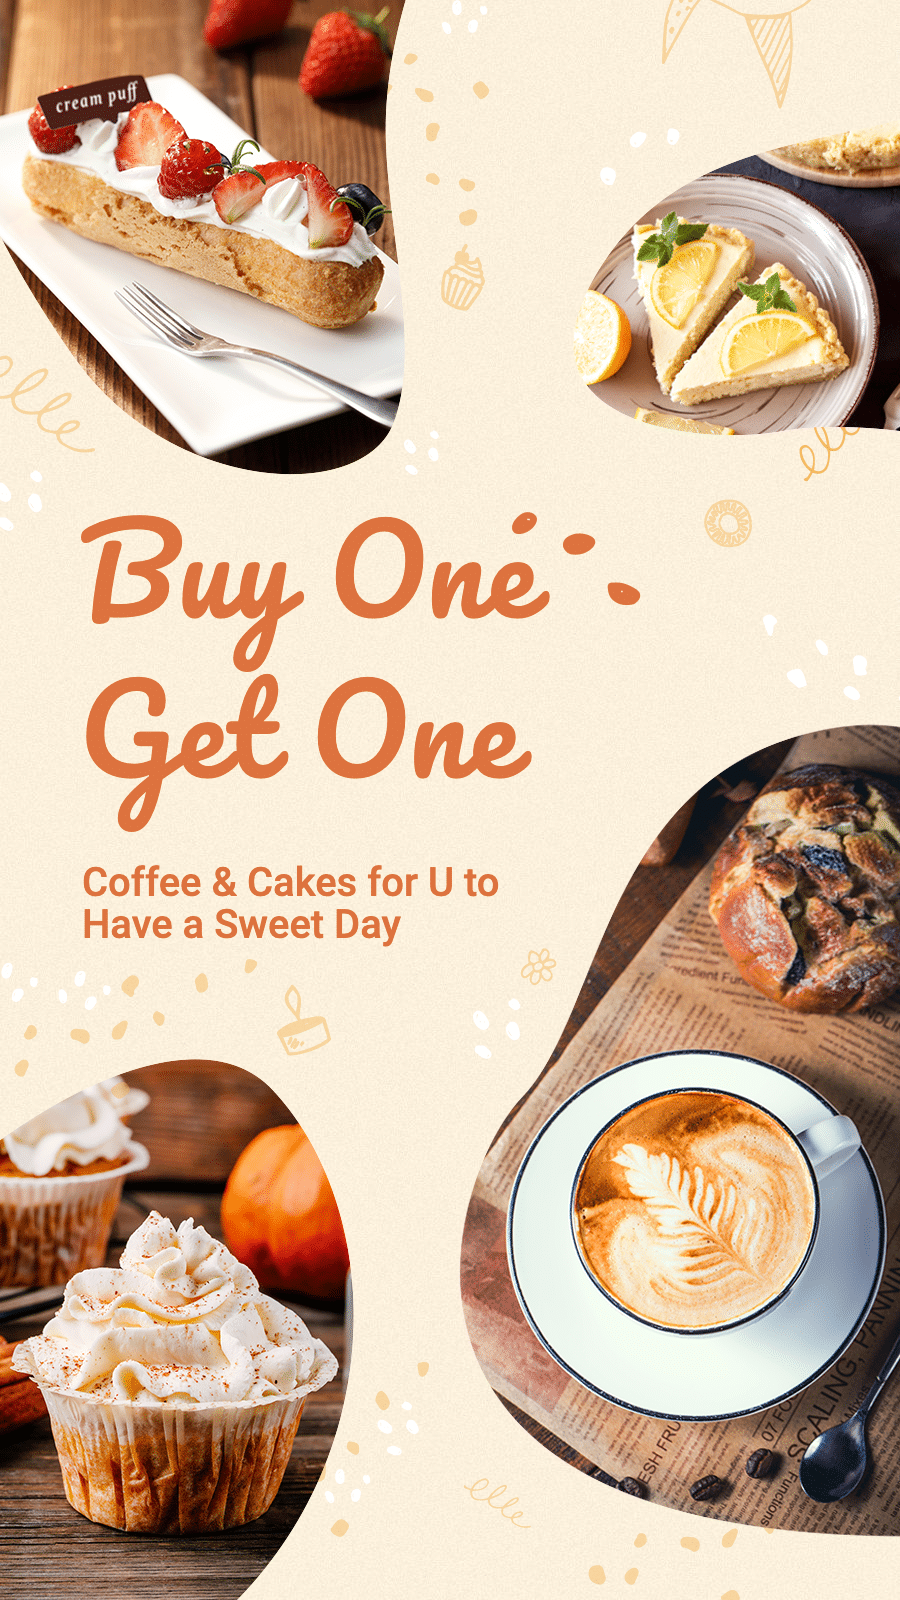 Cute Style Coffee And Cake Display Promo Ecommerce Story预览效果